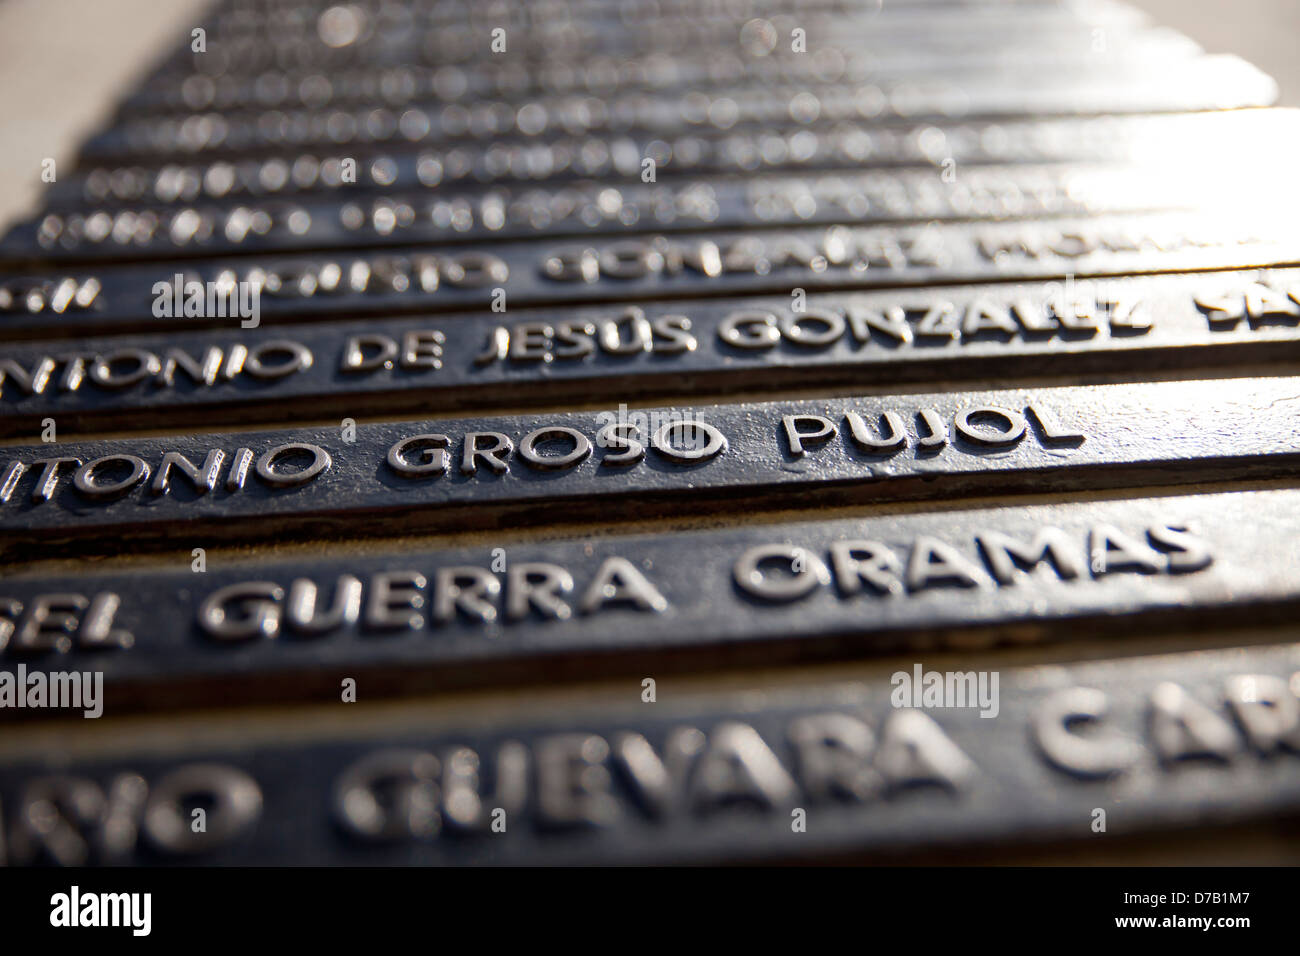 memorial with the names of dead soldiers at the museum in Playa Giron (Giron beach), Bahia de Cochinos (Bay of Pigs), Cuba, Stock Photo